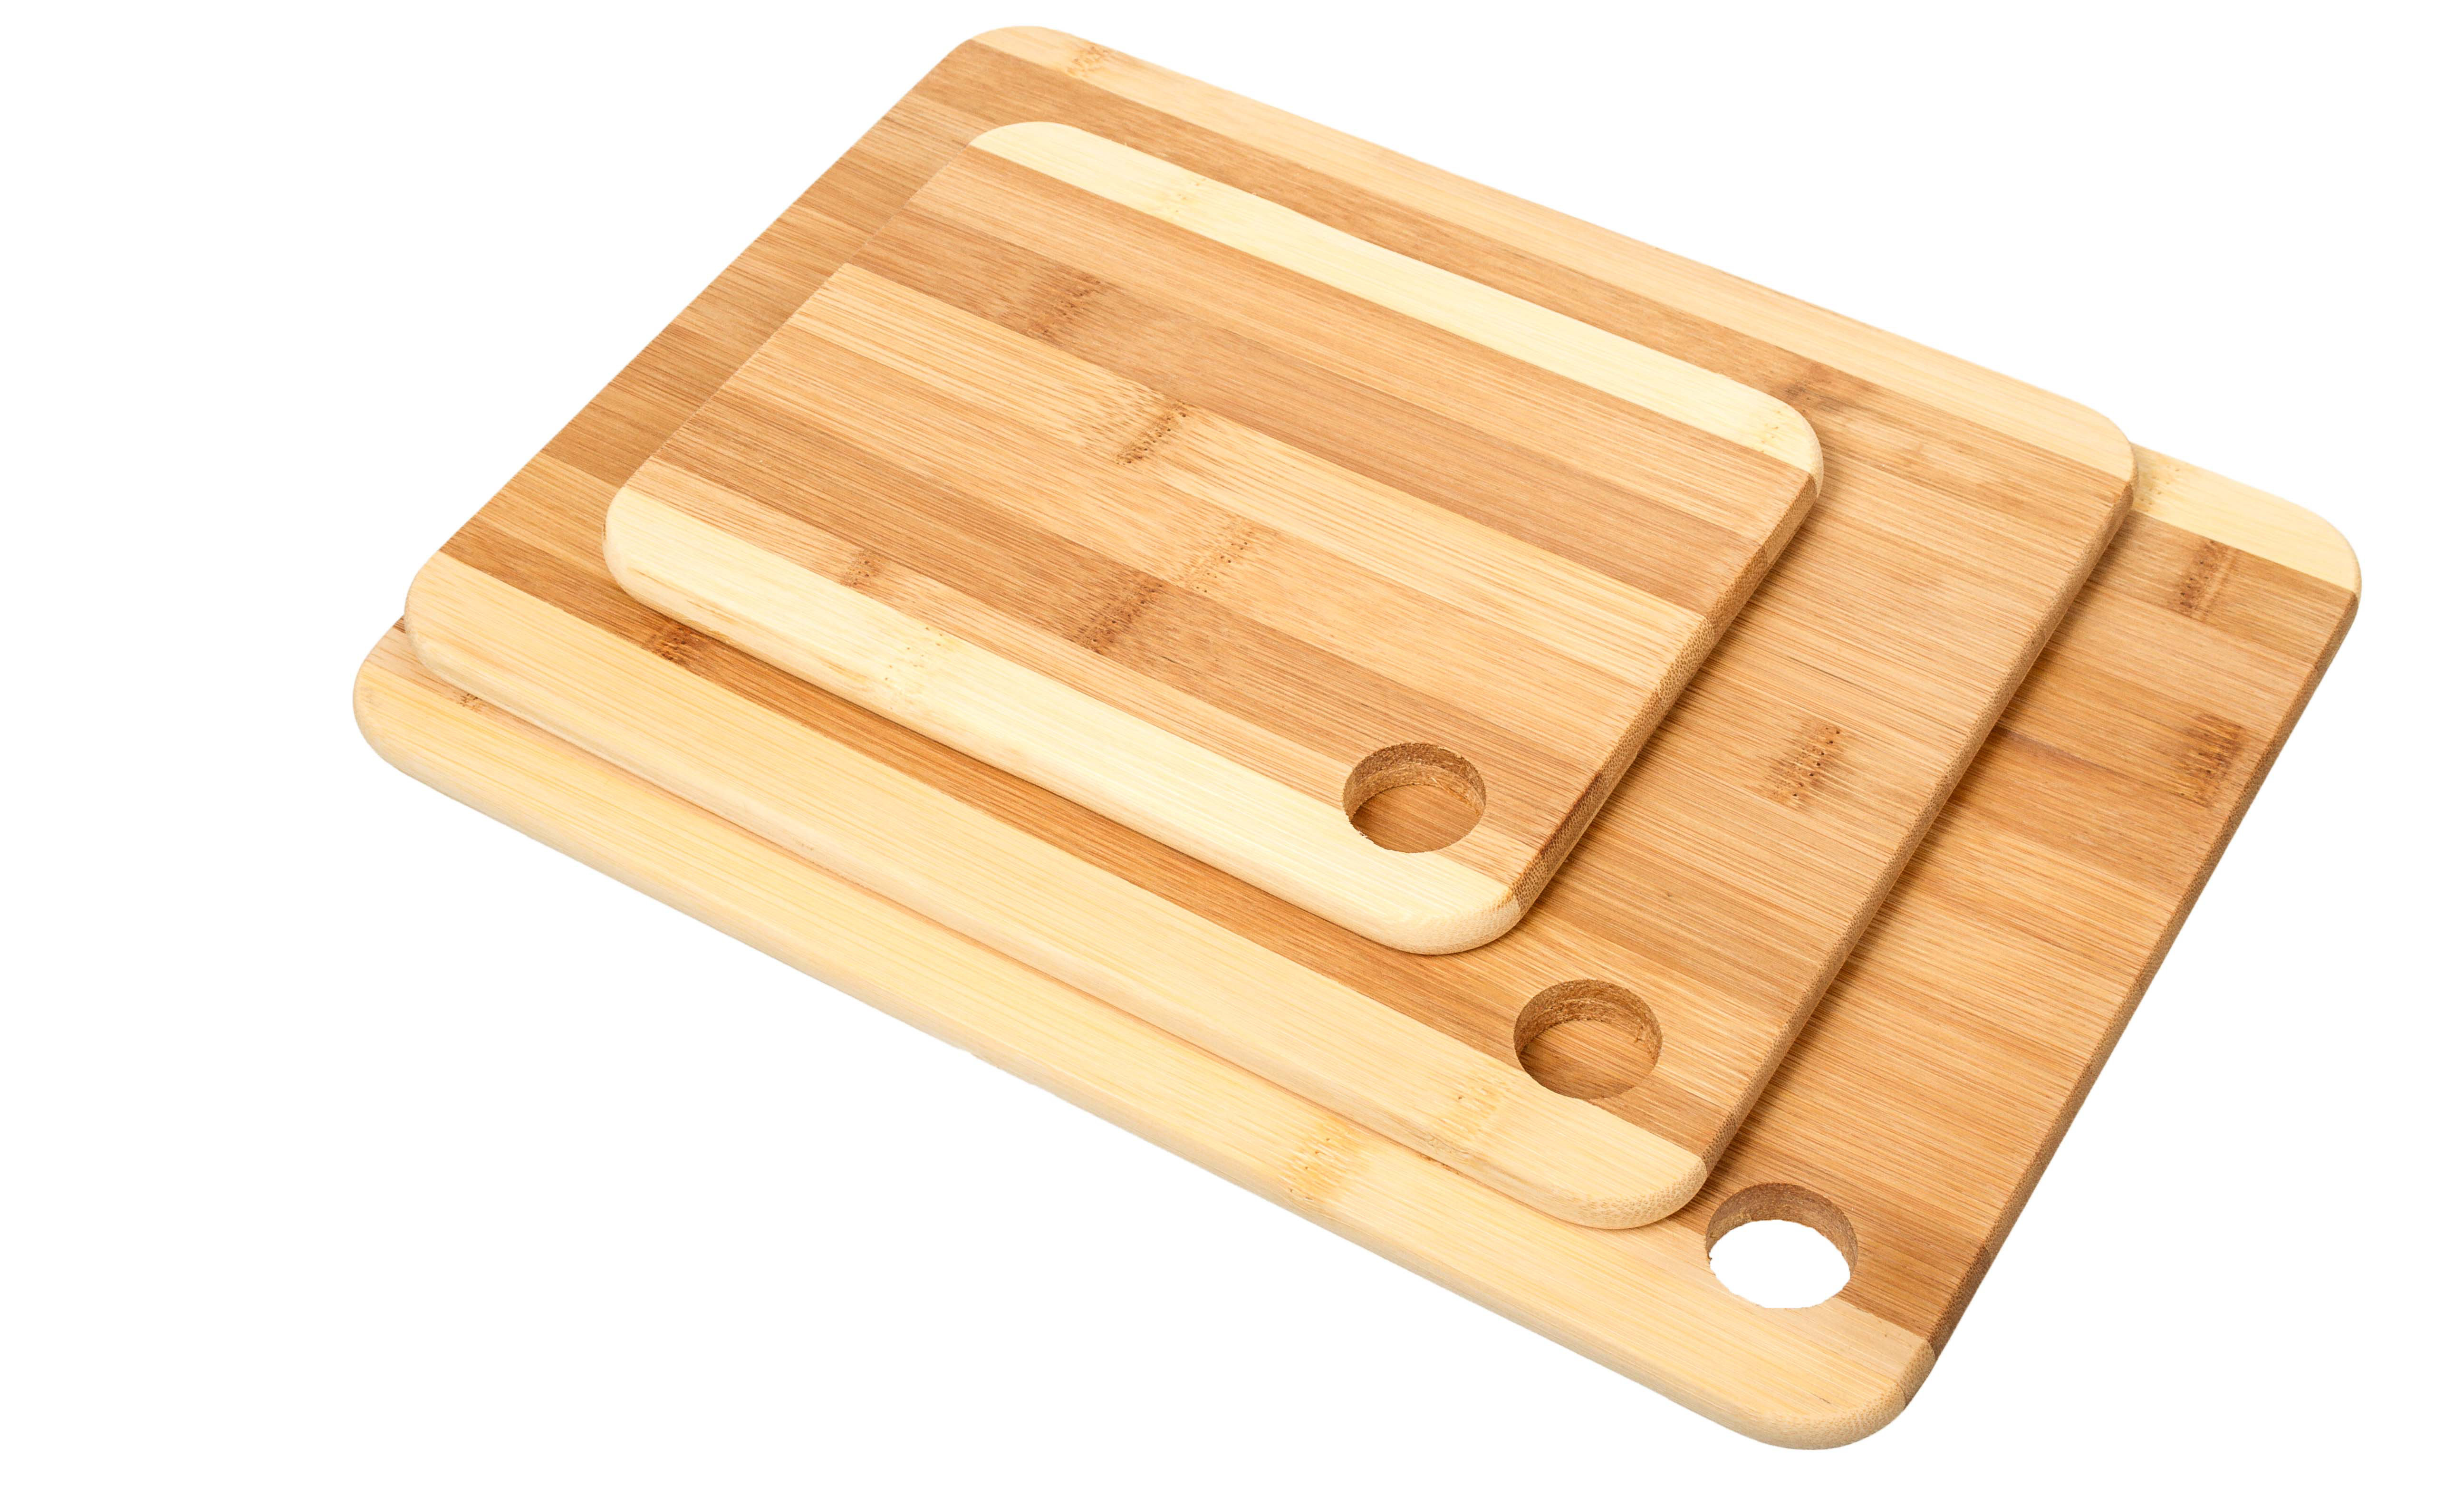  ROYAL CRAFT WOOD Cutting Boards for Kitchen - Bamboo Cutting  Board Set of 3, Cutting Boards with Juice Grooves, Serving Board Set, Thick Chopping  Board for Meat, Veggies, Easy Grip Handle